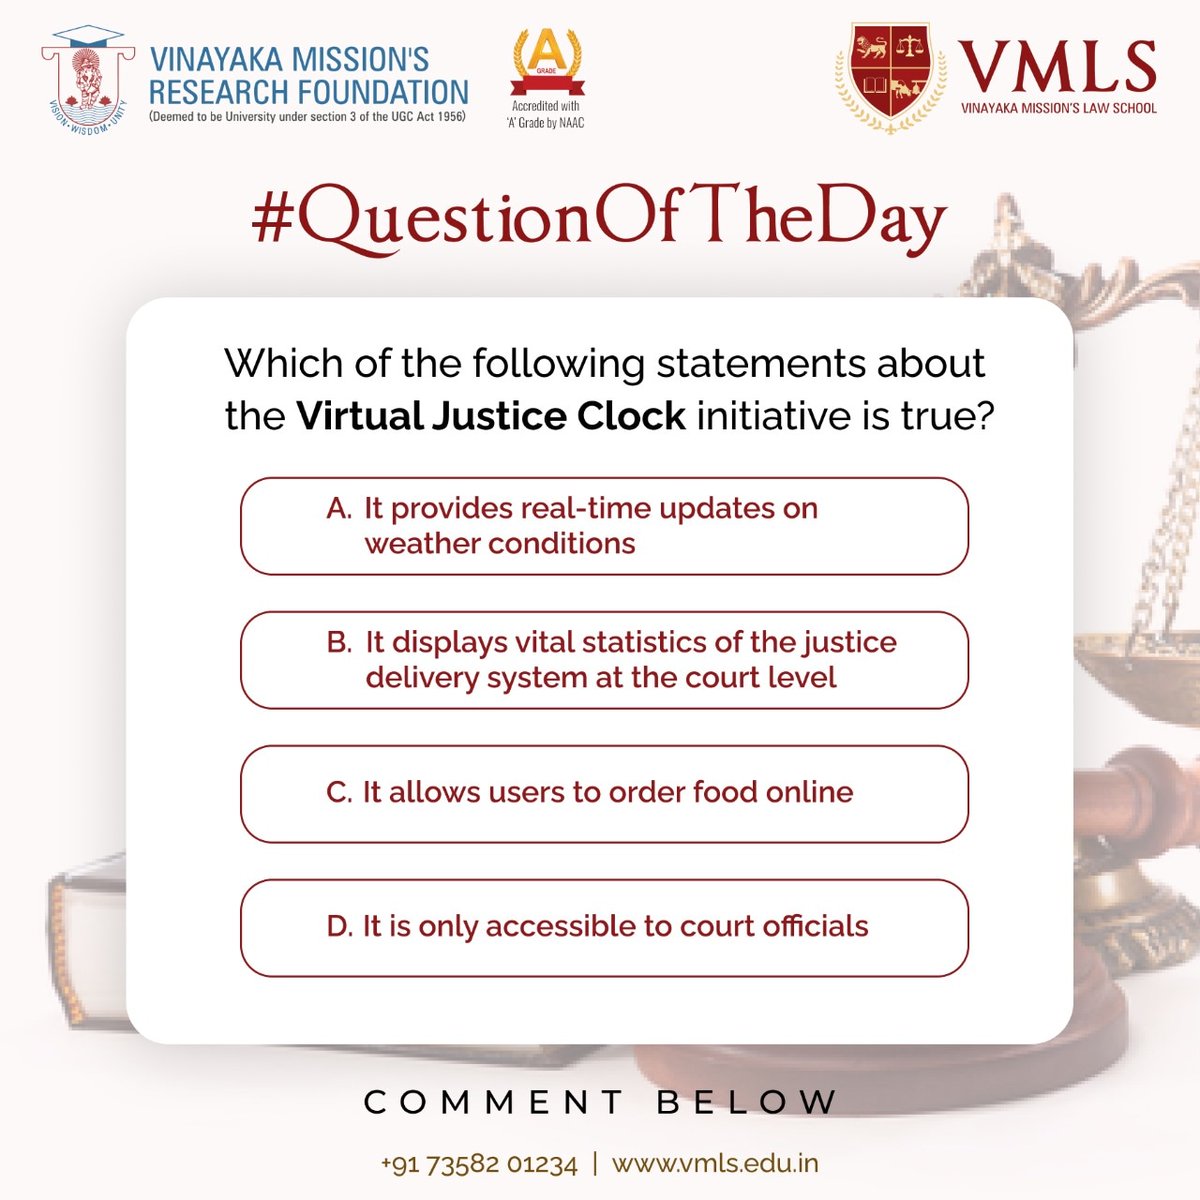 Which of the following statements about the Virtual Justice Clock initiative is true?

#questionoftheday #qotd #Law #lawquestions #vmls #lawschool #lawcollege #CuriousMinds #AskTheAudience